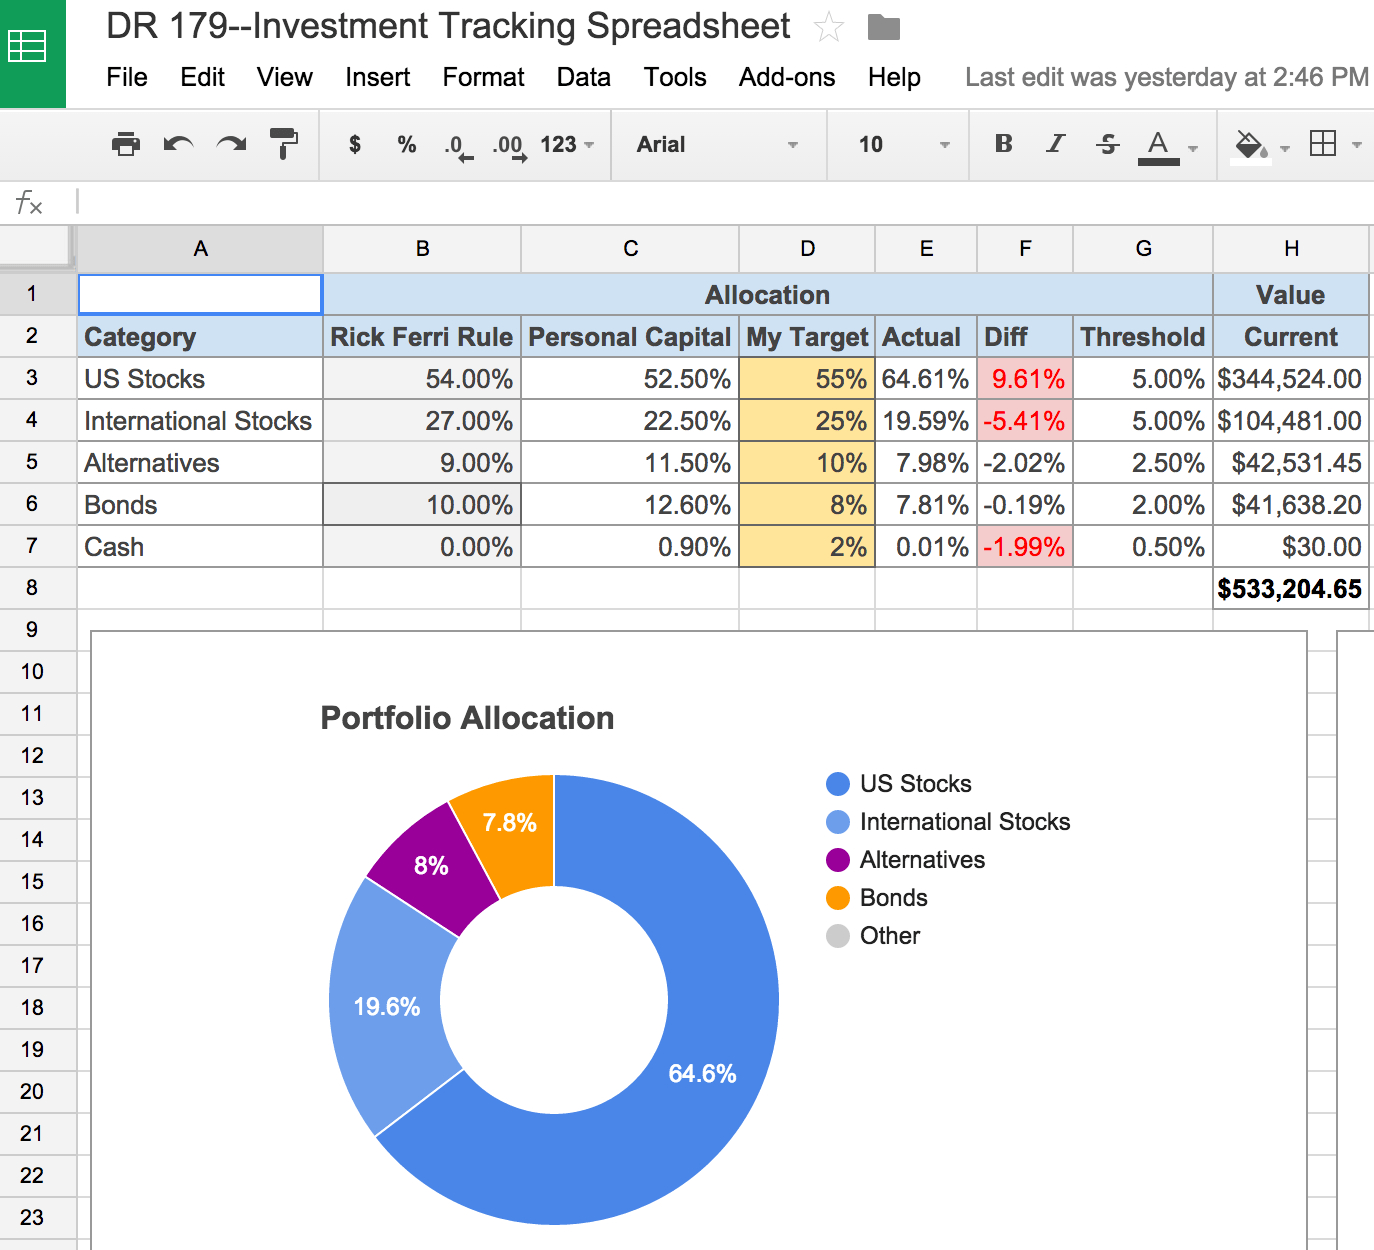 Net Worth Tracker Spreadsheet With An Awesome And Free Investment Tracking Spreadsheet